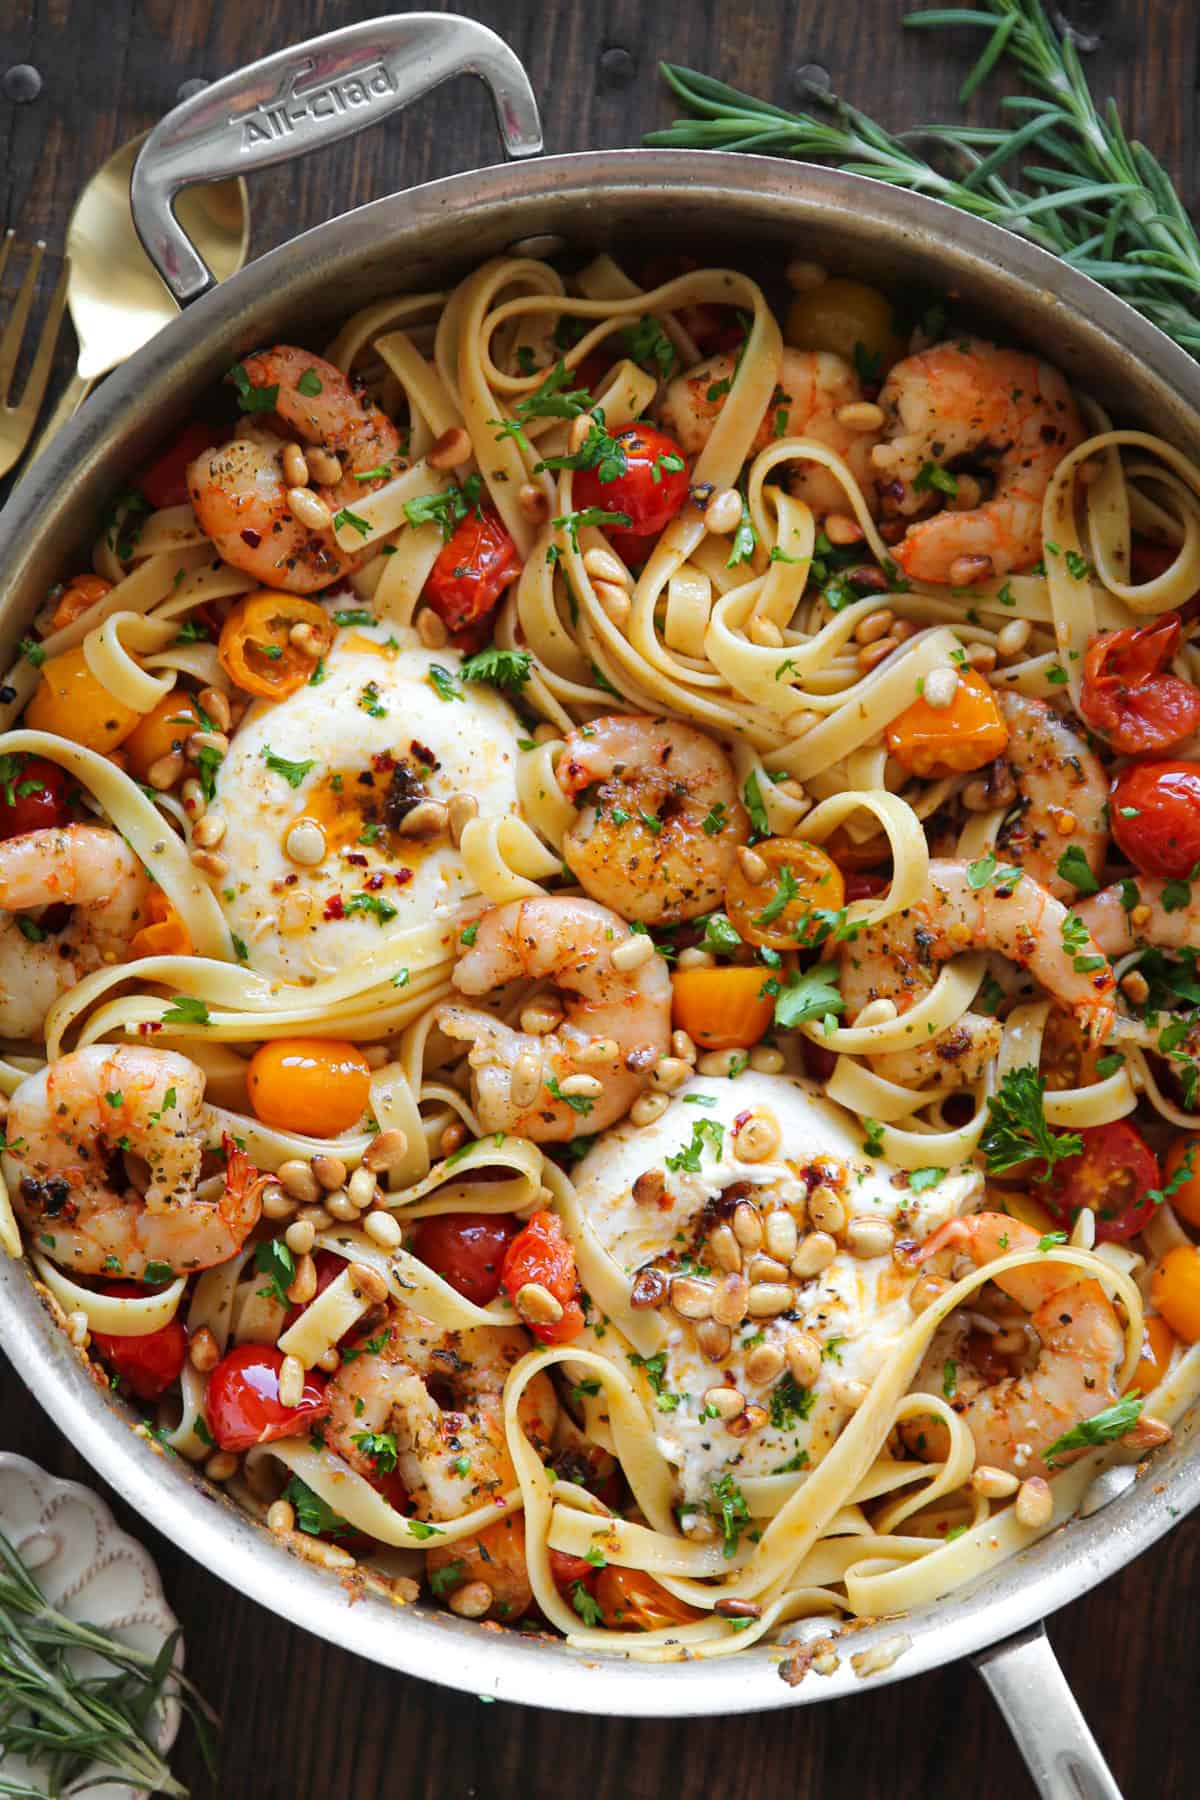 Mediterranean Shrimp Pasta with Cherry Tomatoes, Burrata Cheese, and Pine Nuts - in a stainless steel skillet.